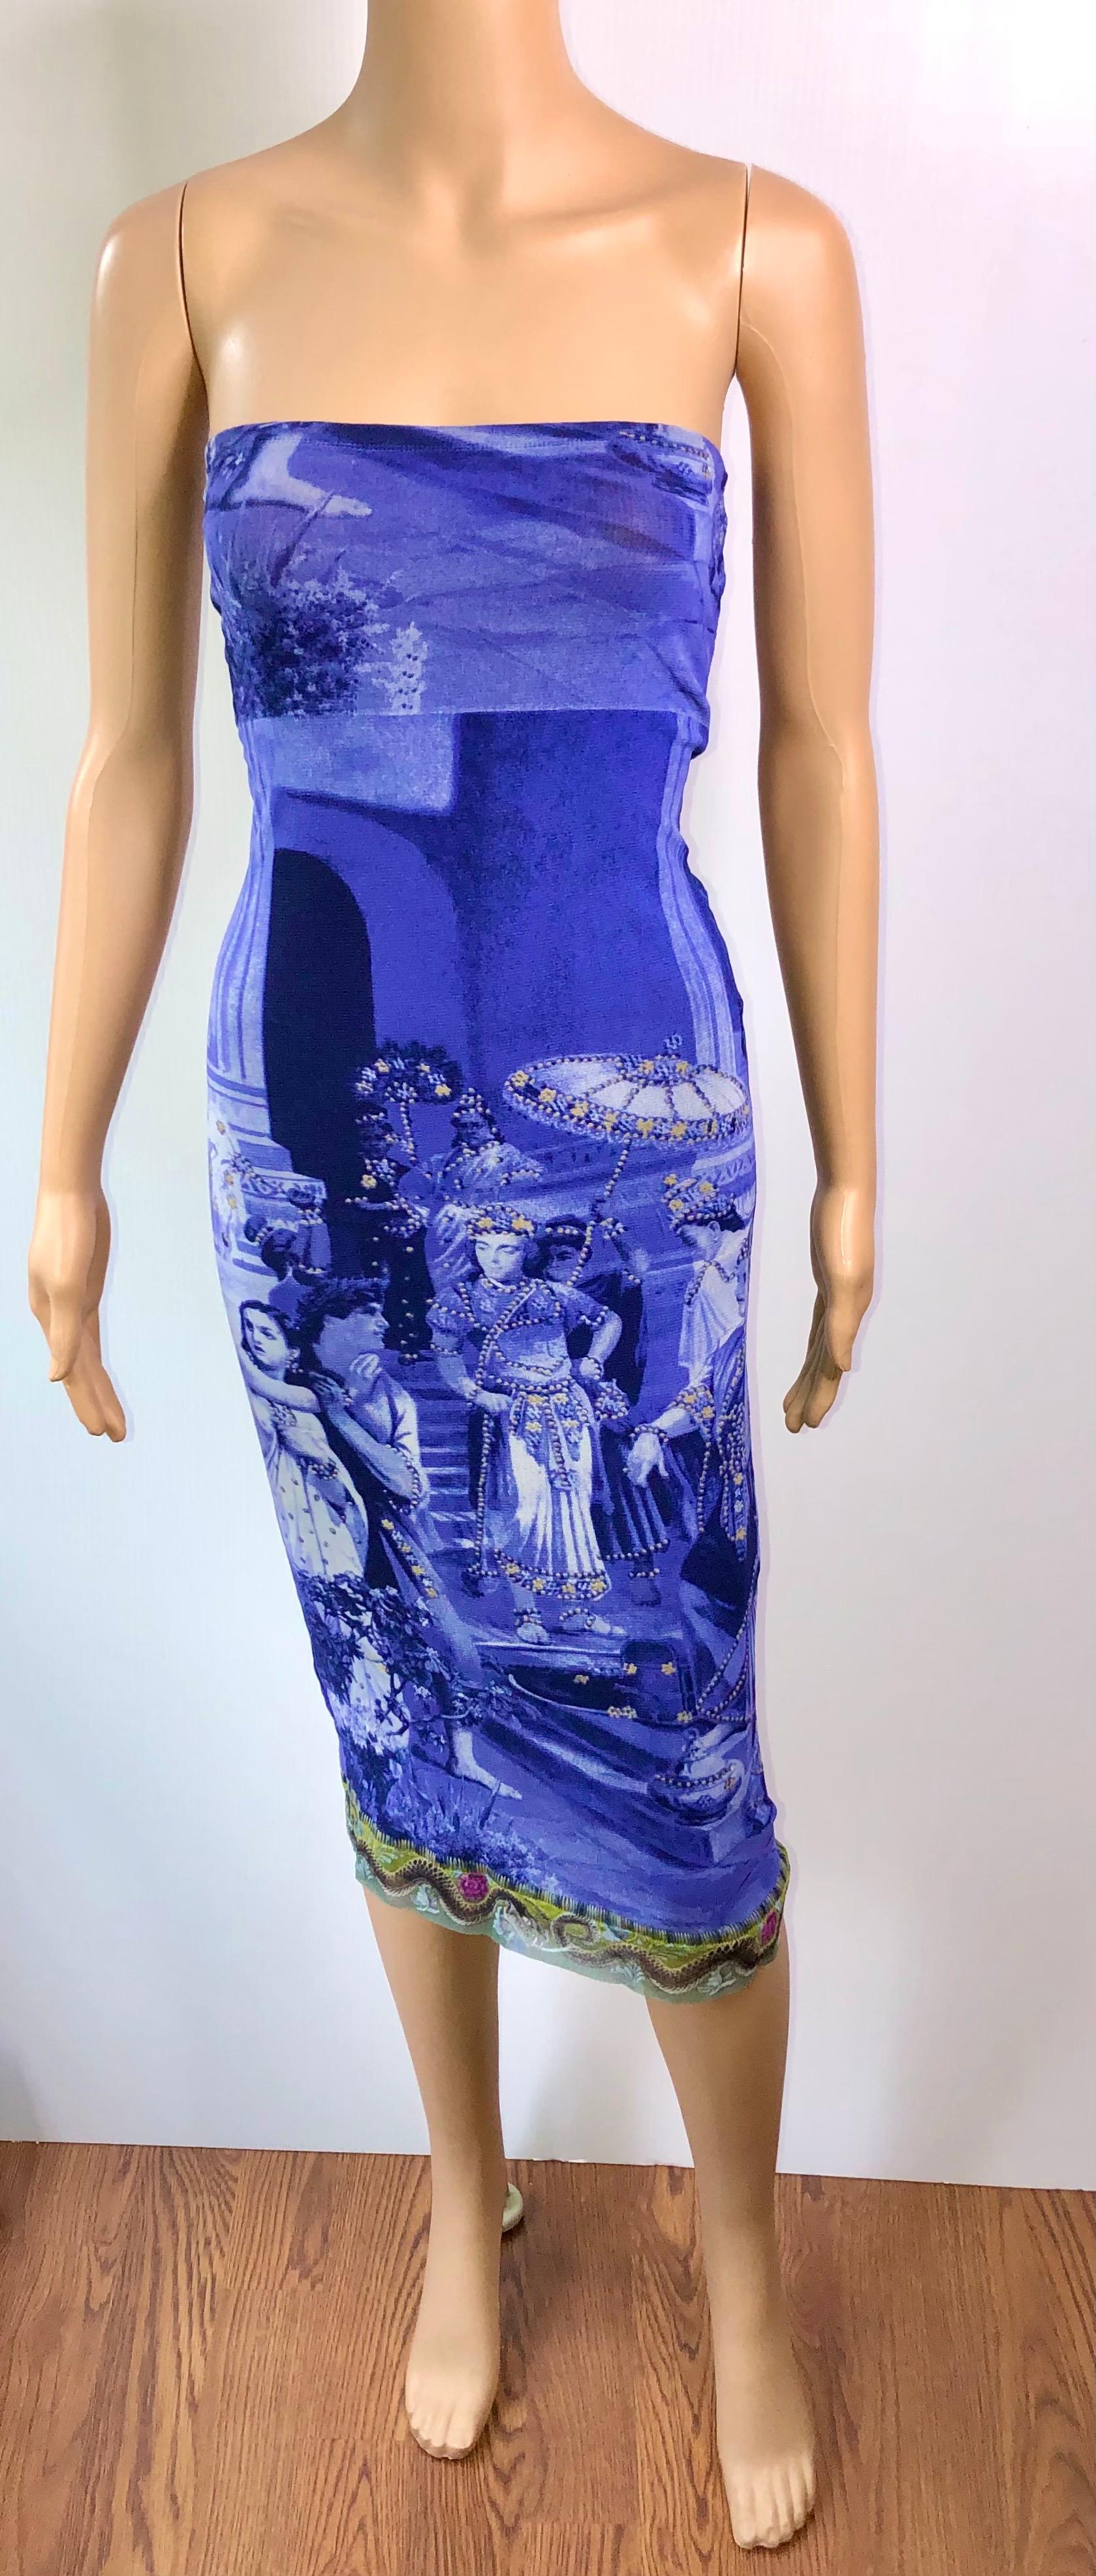 Jean Paul Gaultier Vintage S/S 1998 Frida Kahlo Bodycon Semi-Sheer Mesh Skirt Dress

Please note this piece is very versatile and it could be worn as a strapless dress or a maxi skirt. Please note size tag has been removed.